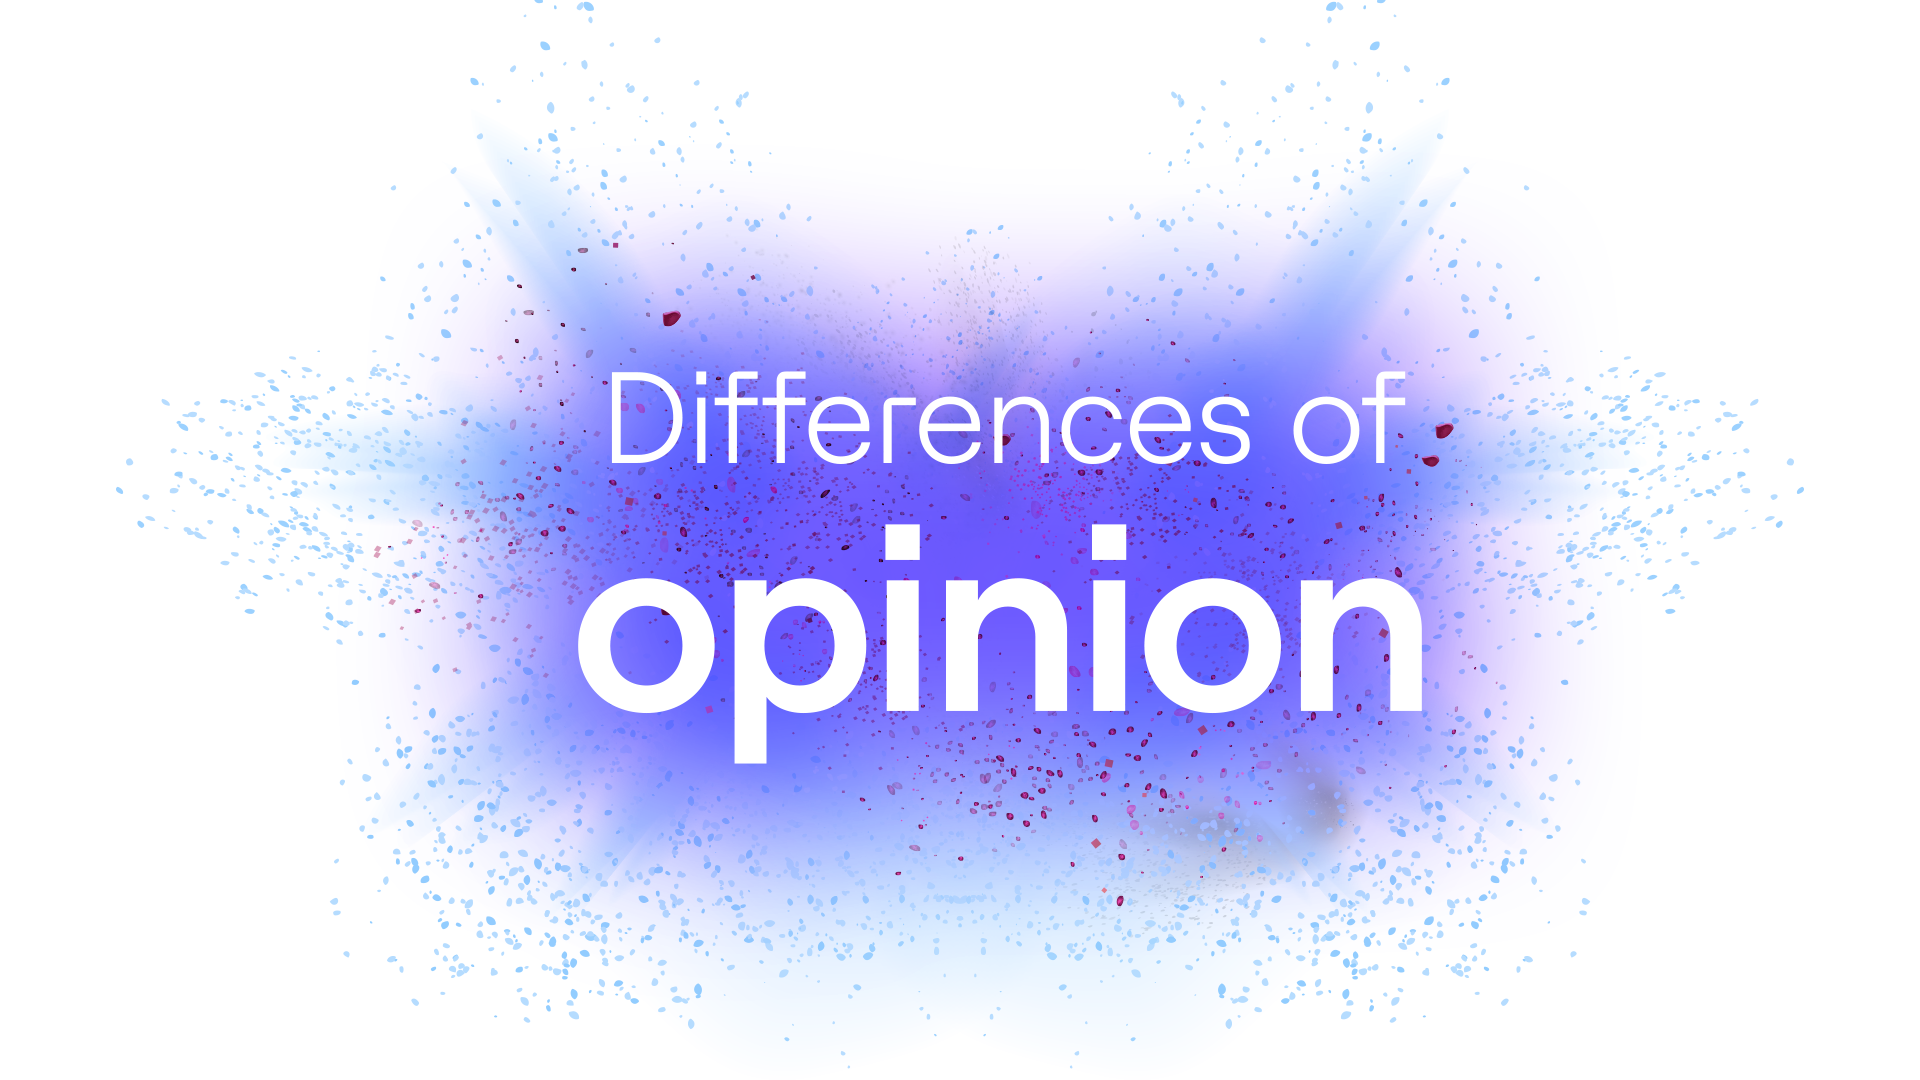 Differences of opinion